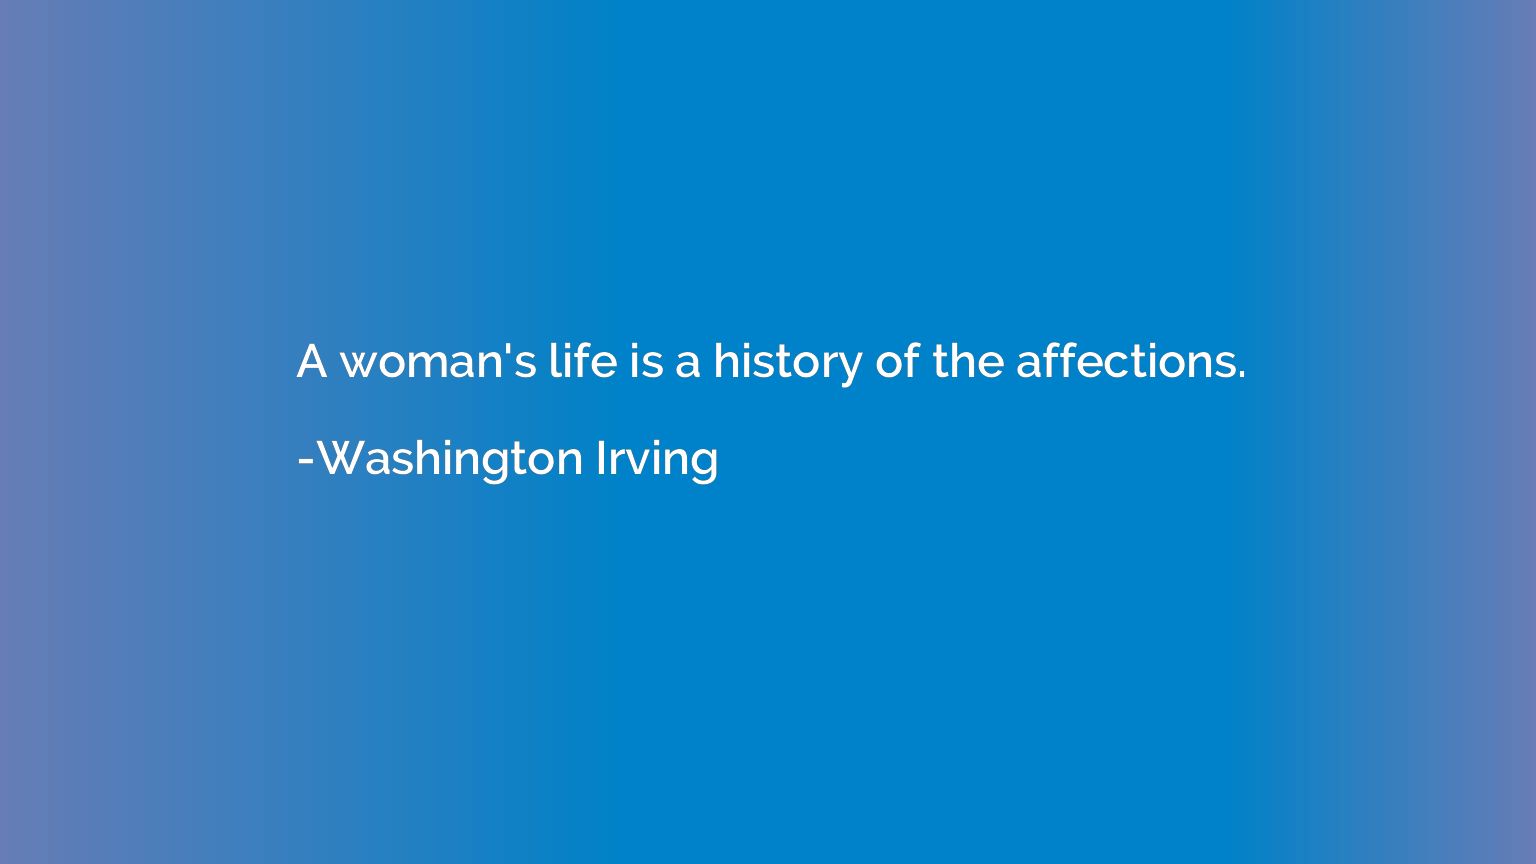 A woman's life is a history of the affections.